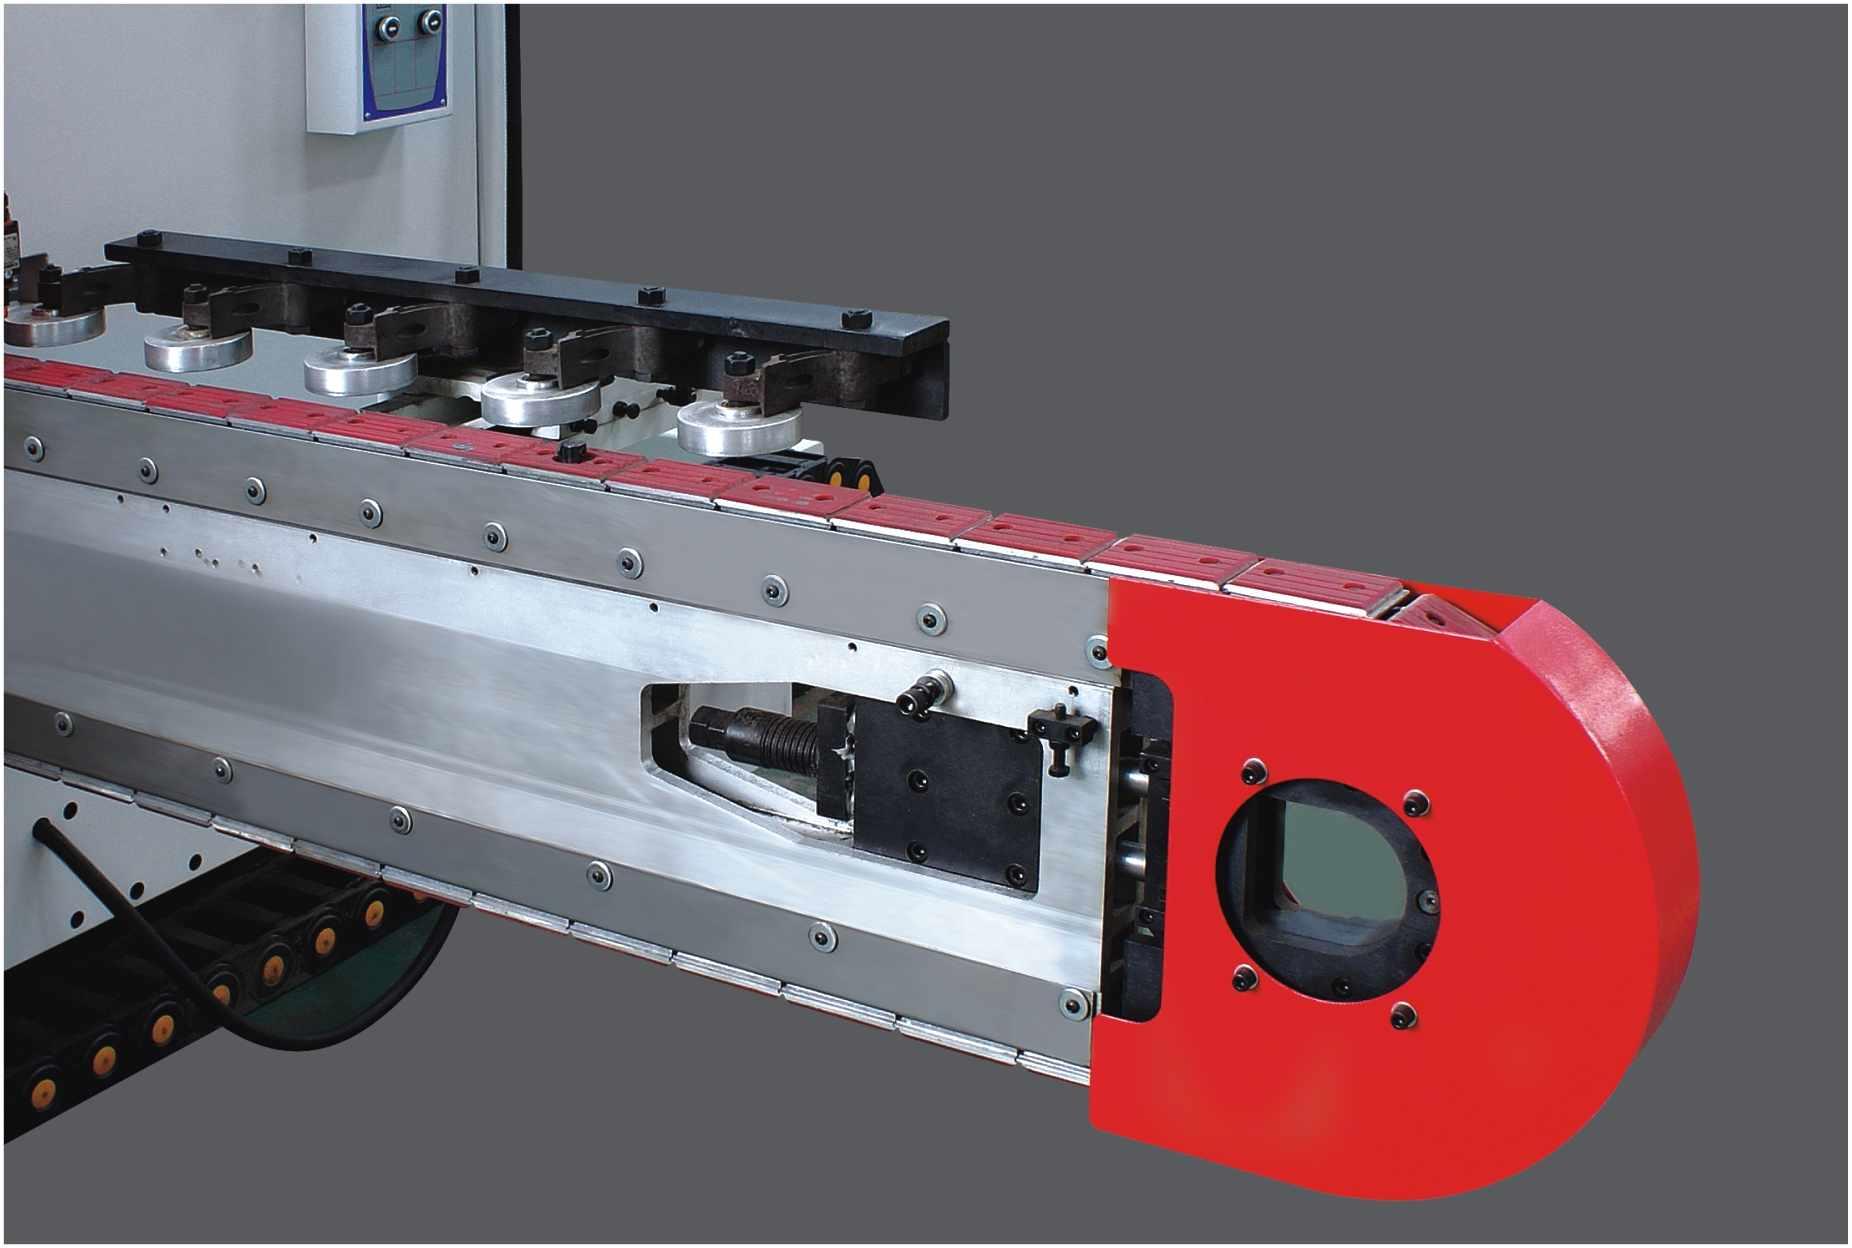 V-hold Machinery double end tenoner machine for wood panels production